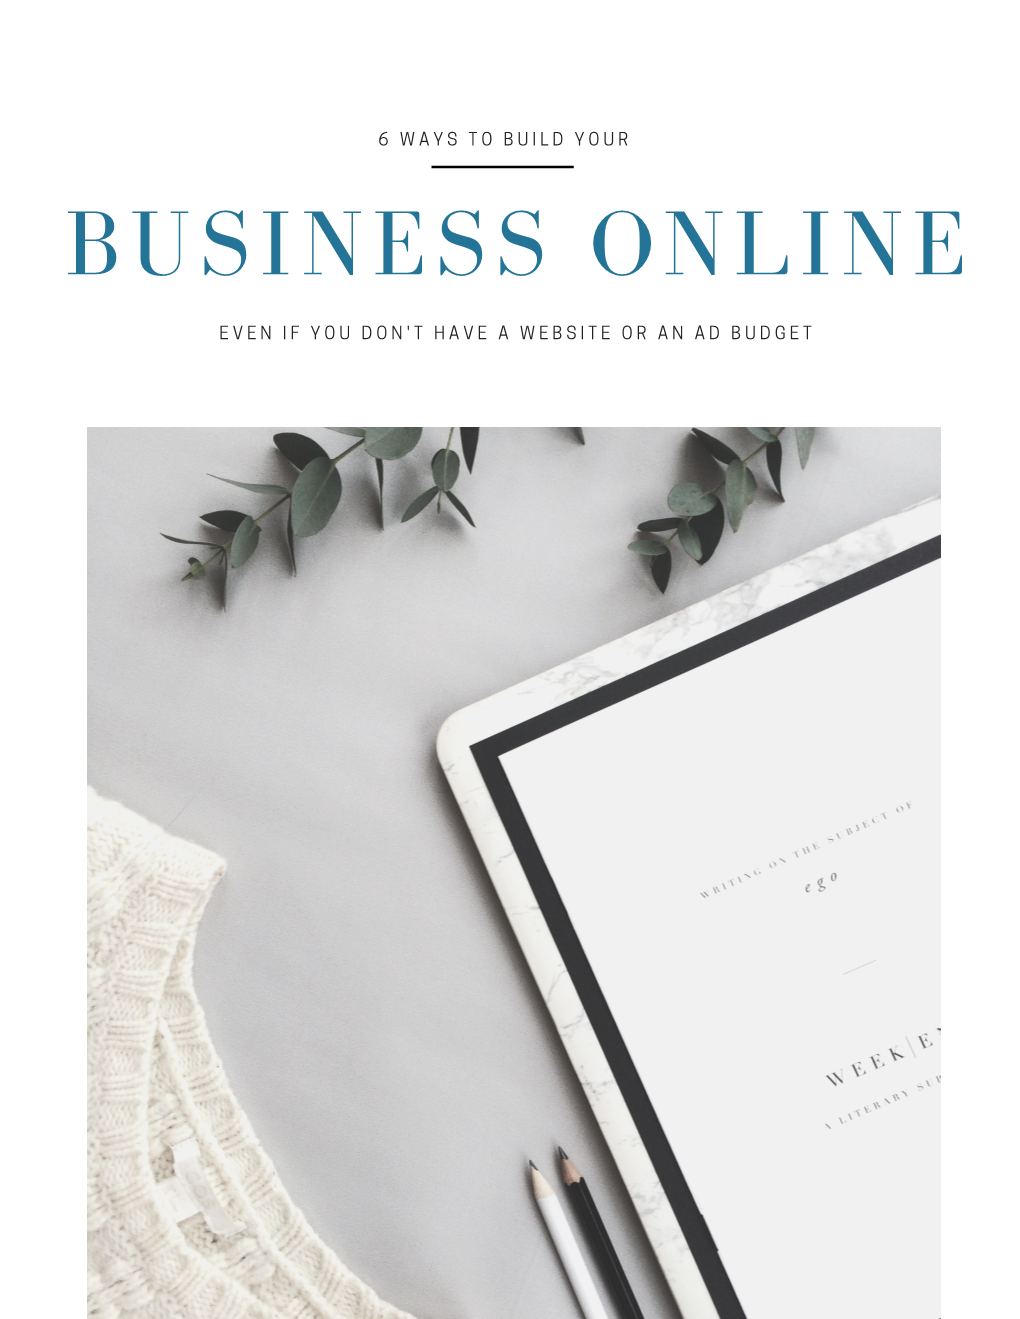 How to Build Your Business Online Even If You Dont